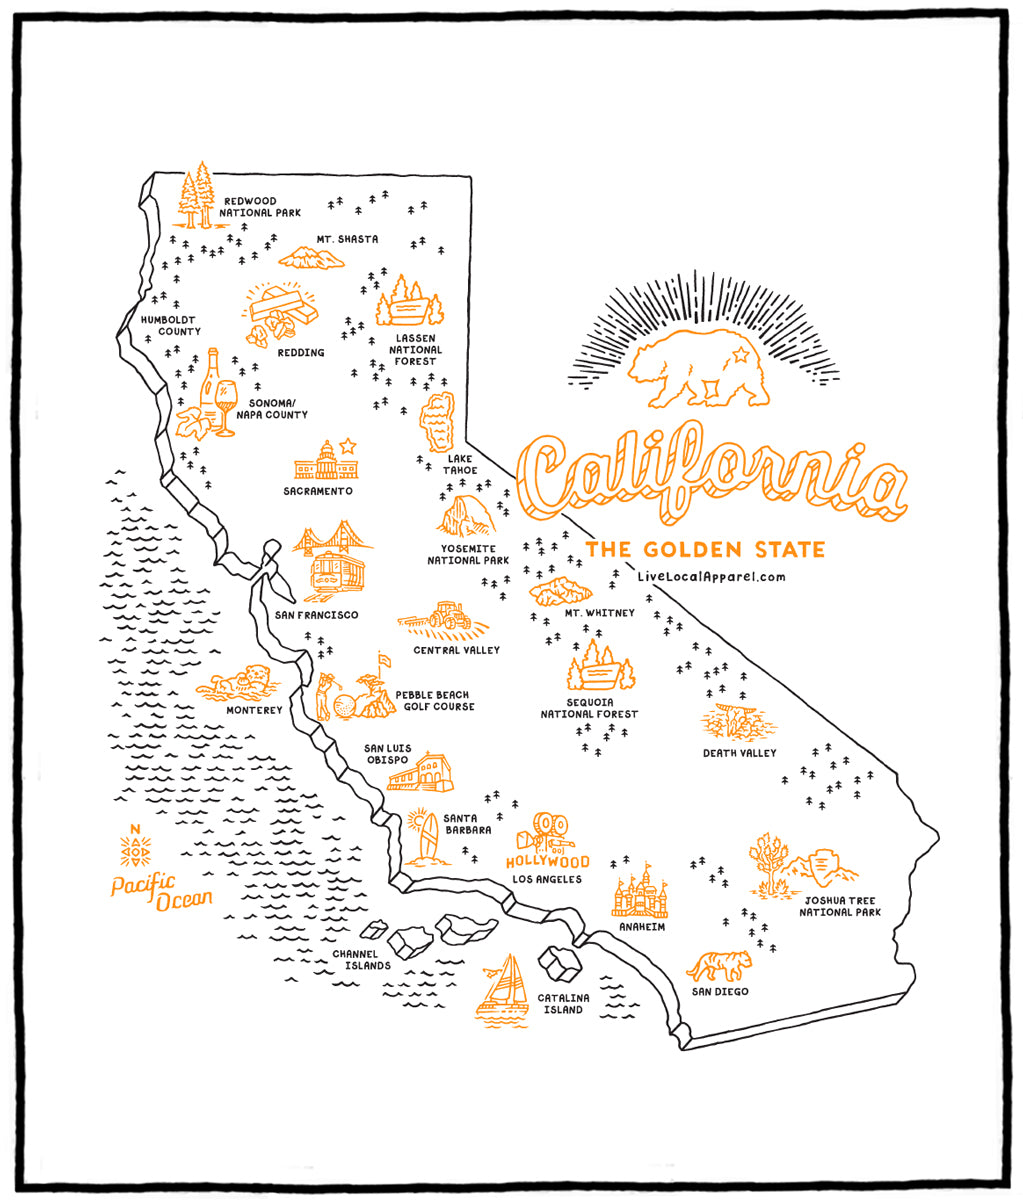 California - See what they Golden State has to offer!